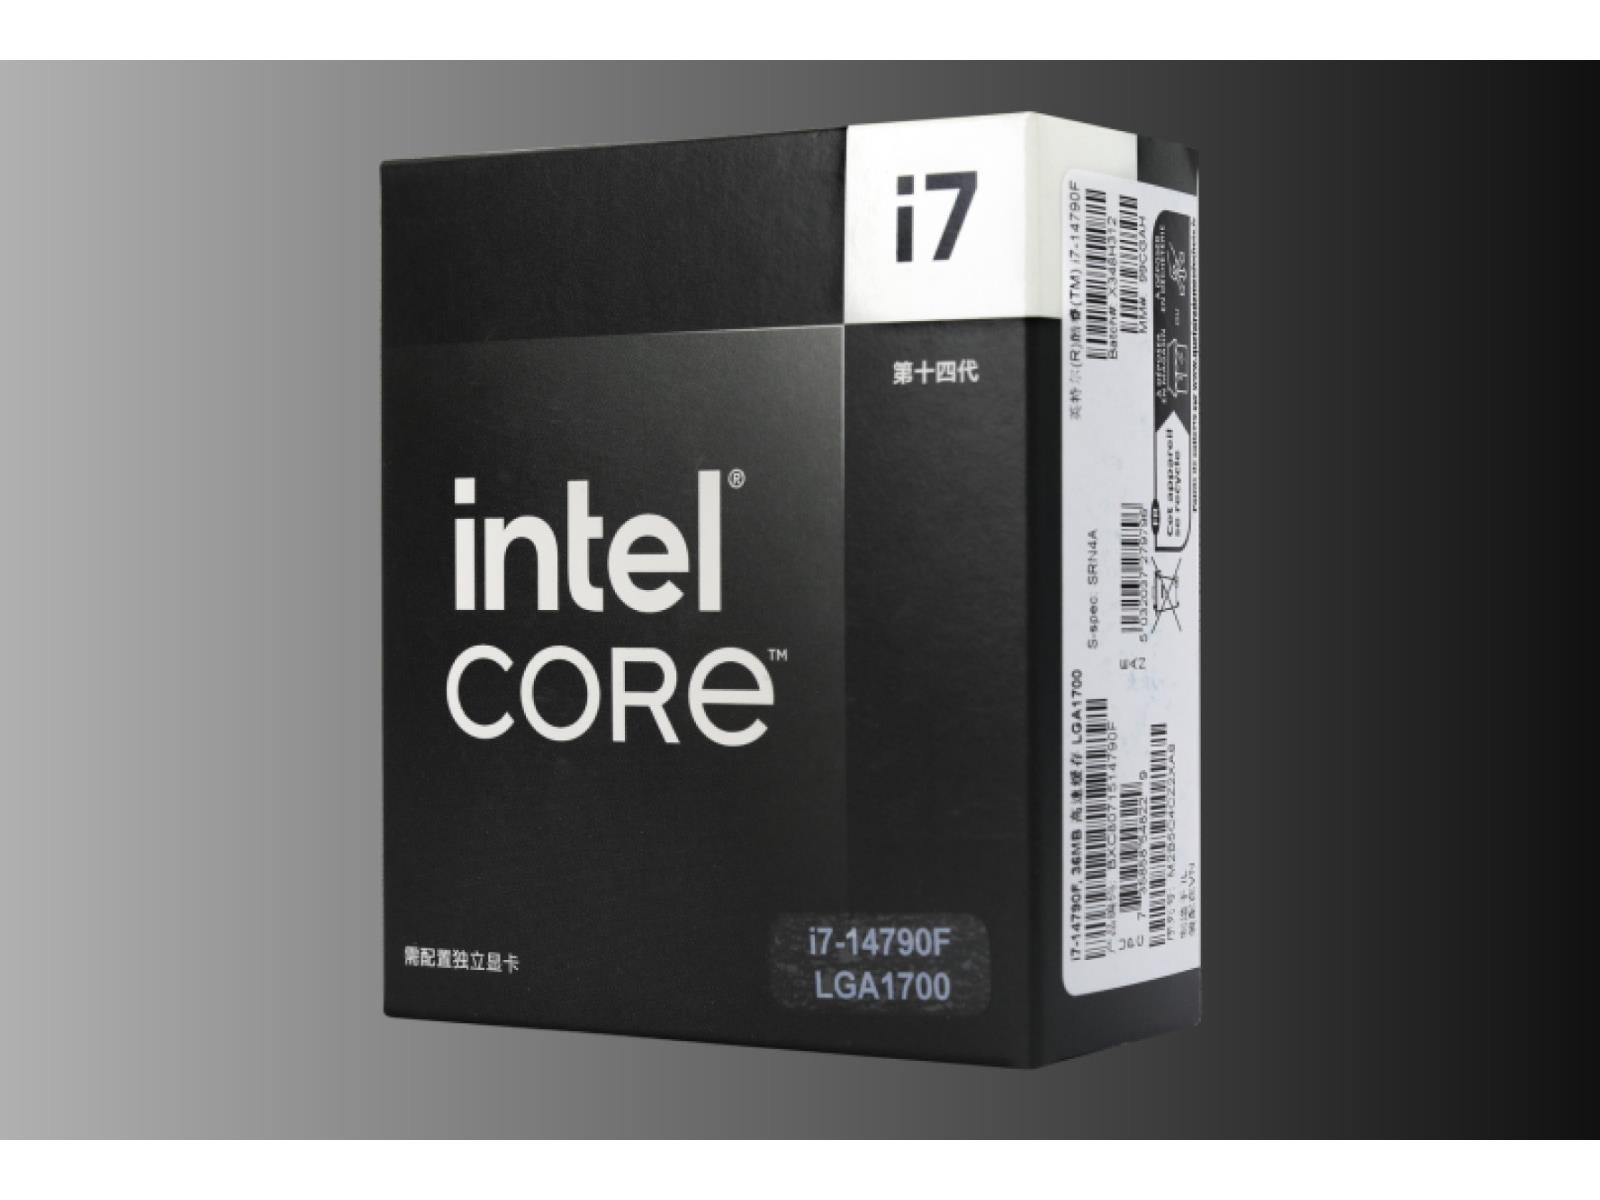 Intel Core i7-14790F Black Edition CPU: AnAnalysis of Specs for the China  Market